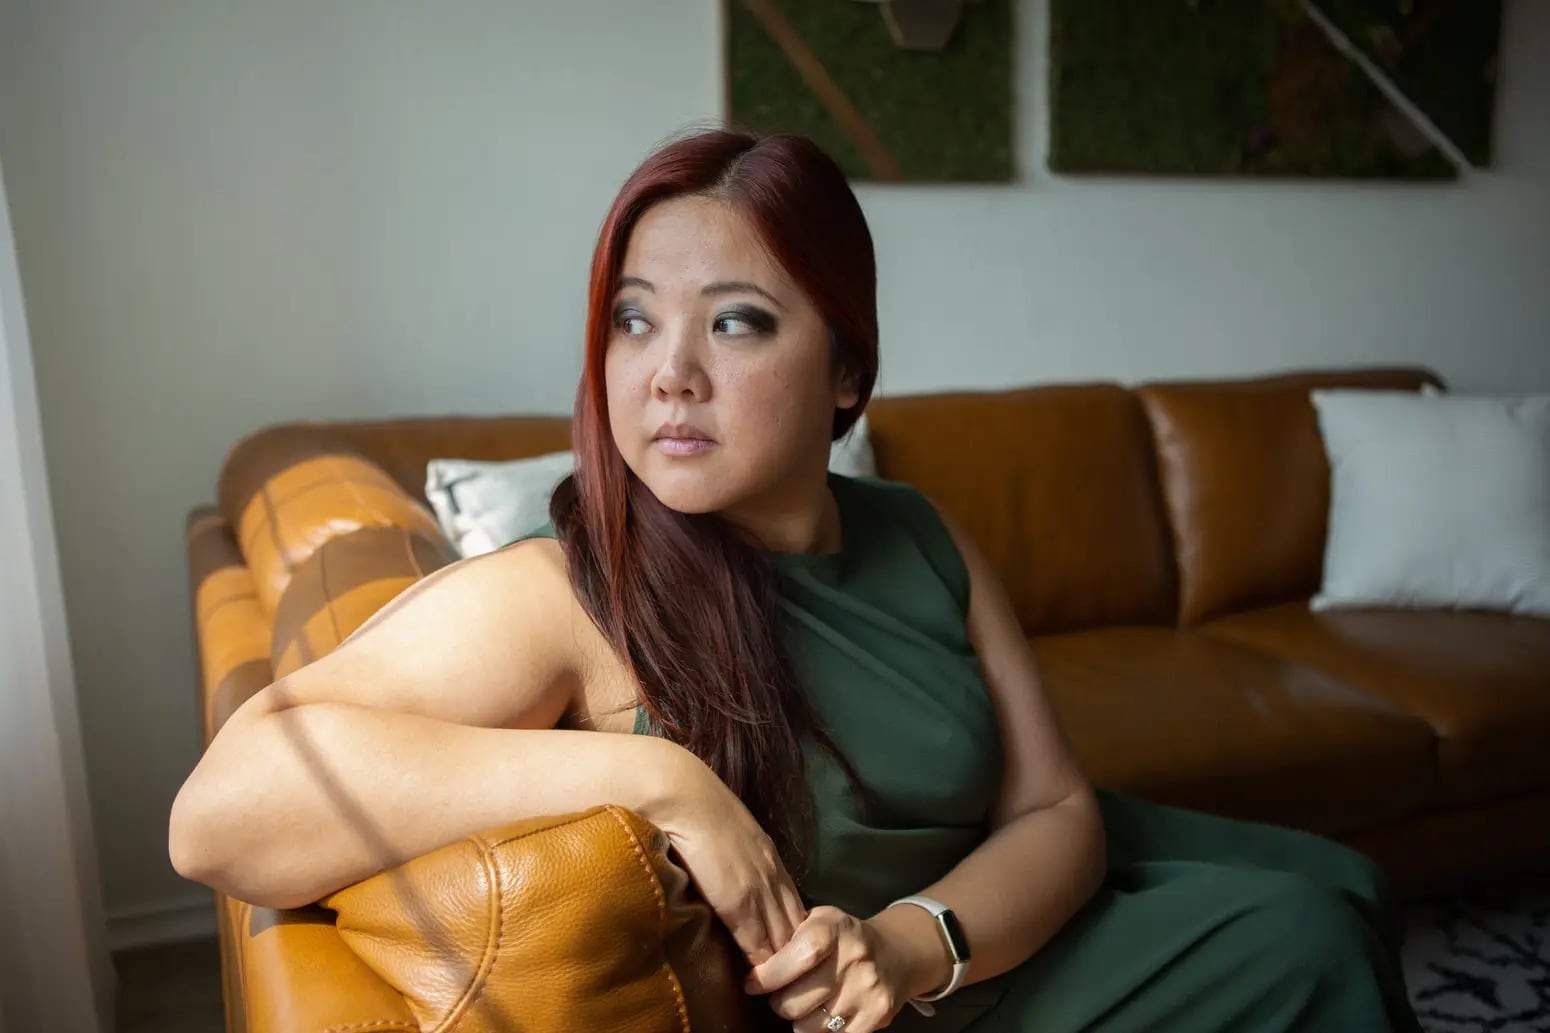 A woman sits on a leather couch, hands clasped and looking over her shoulder.